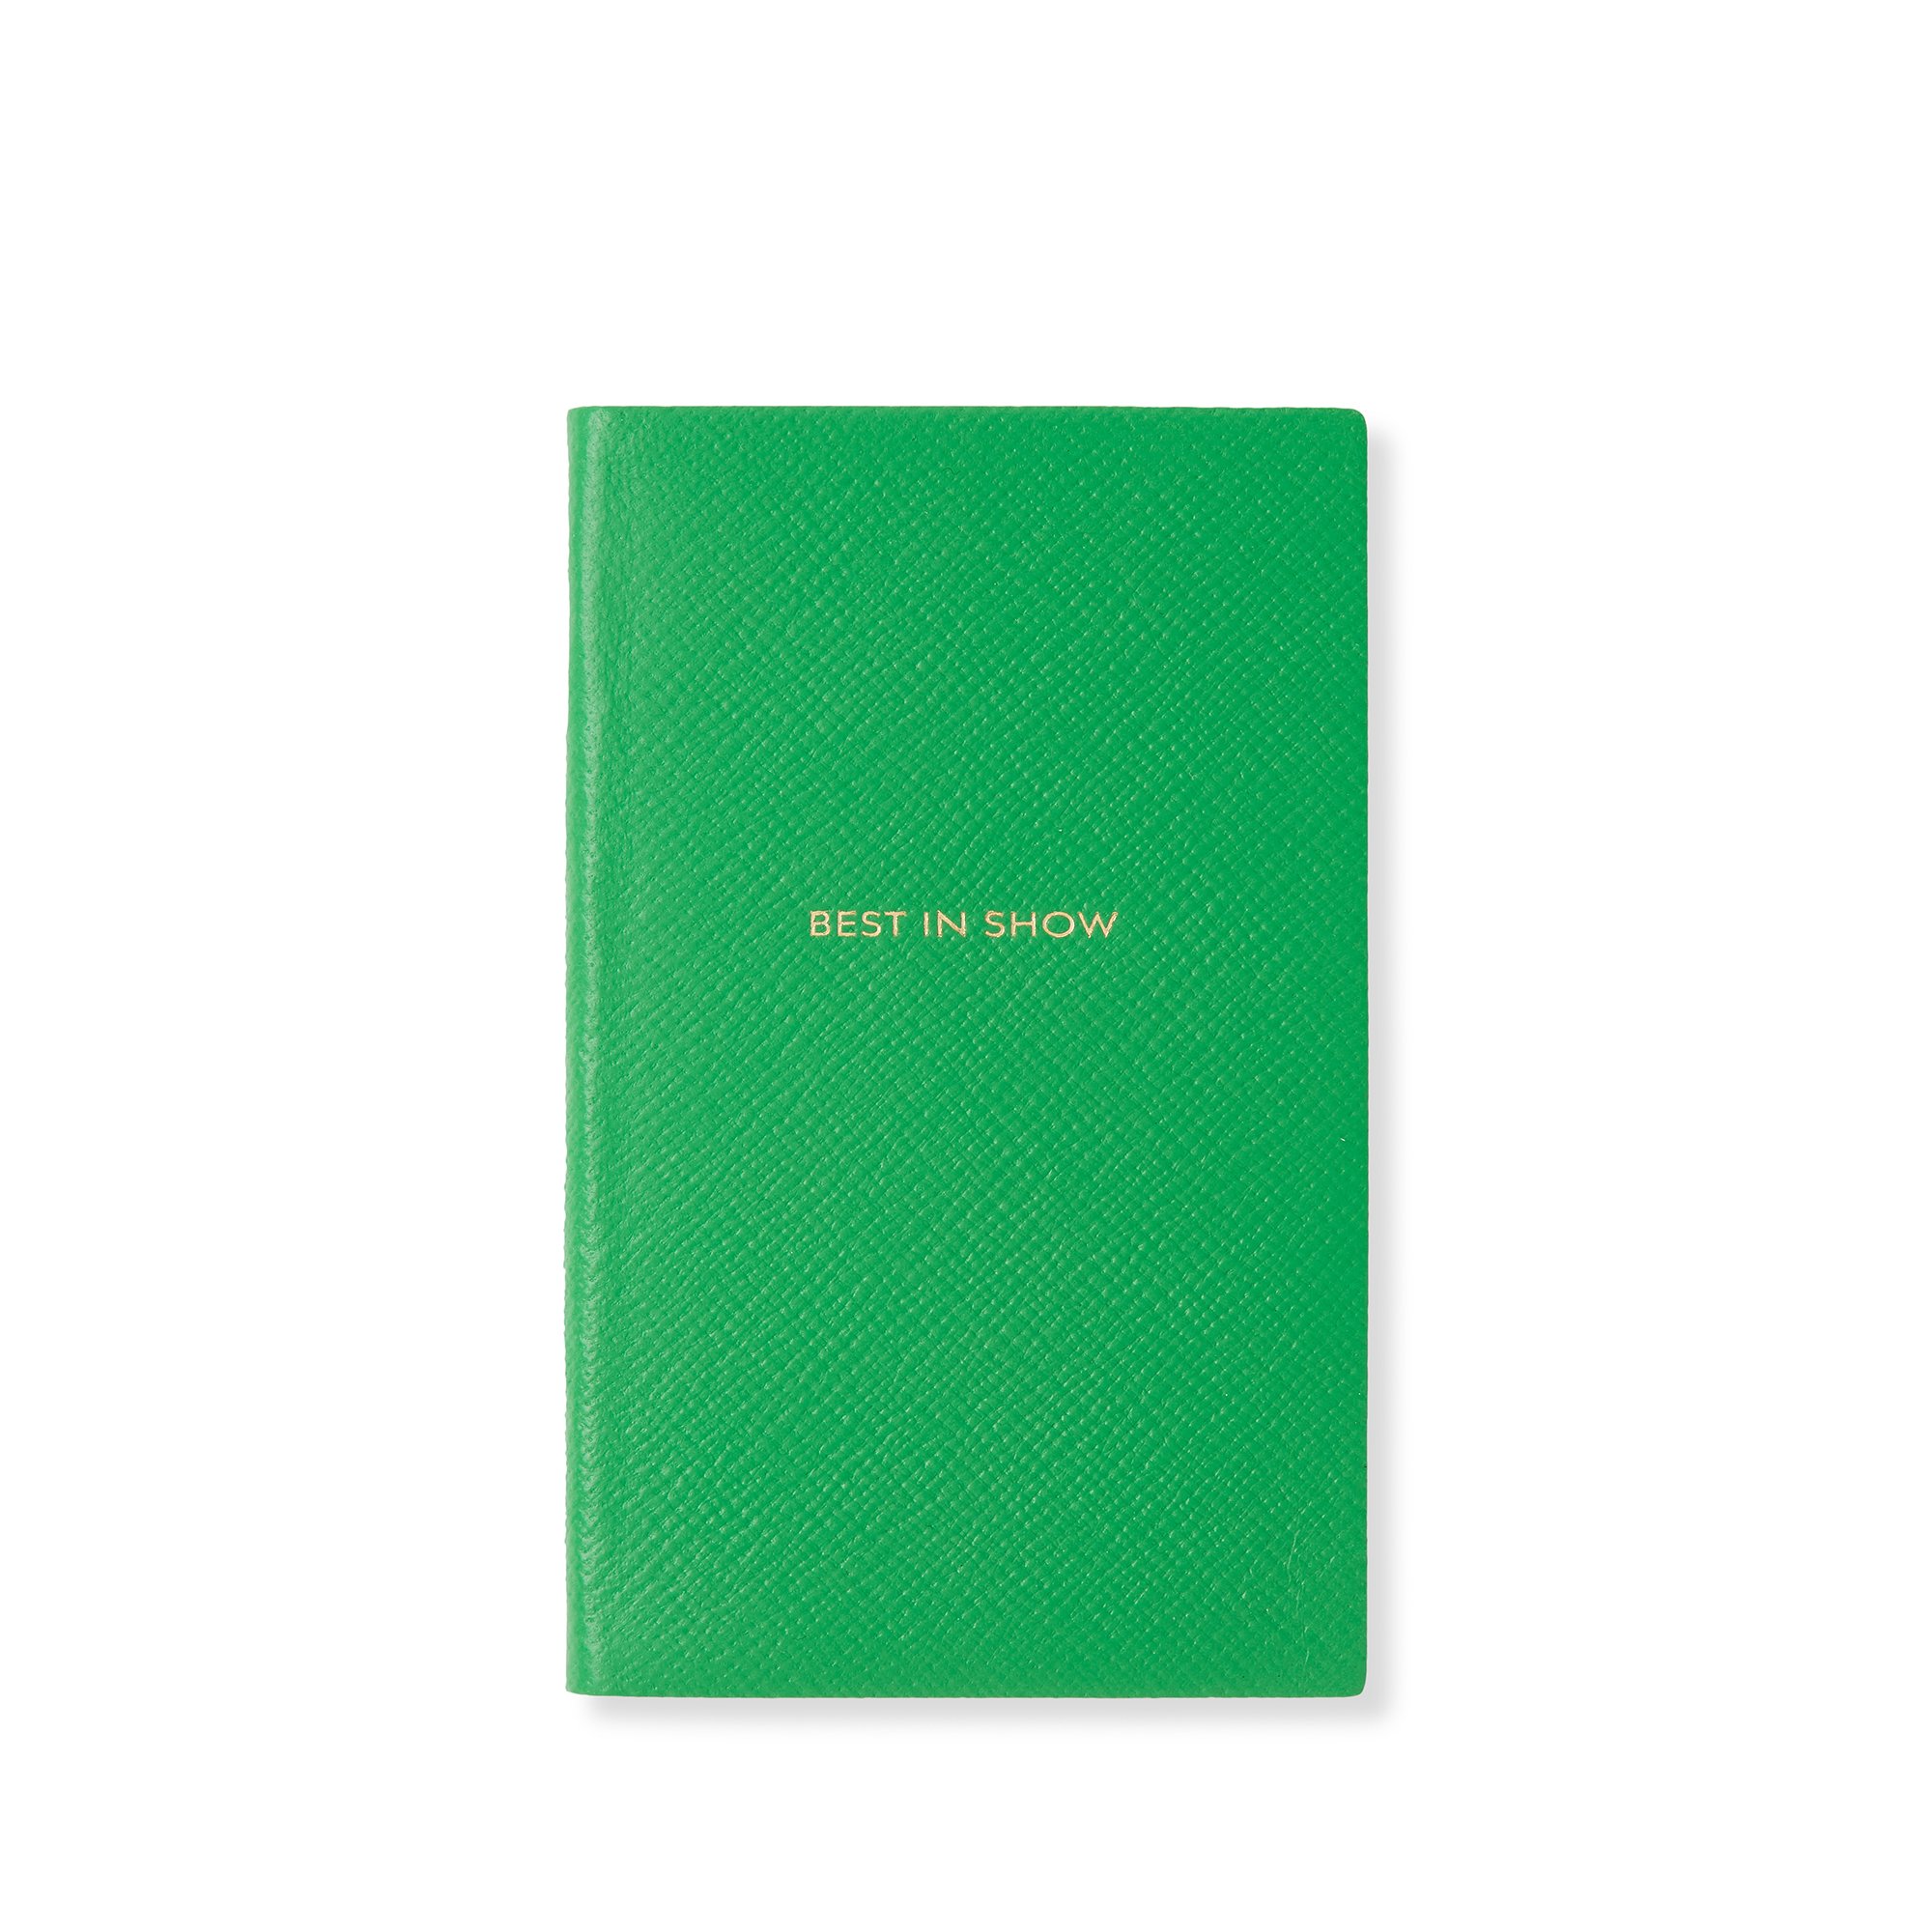 Smythson Inspirations And Ideas Panama Notebook In Bright Emerald